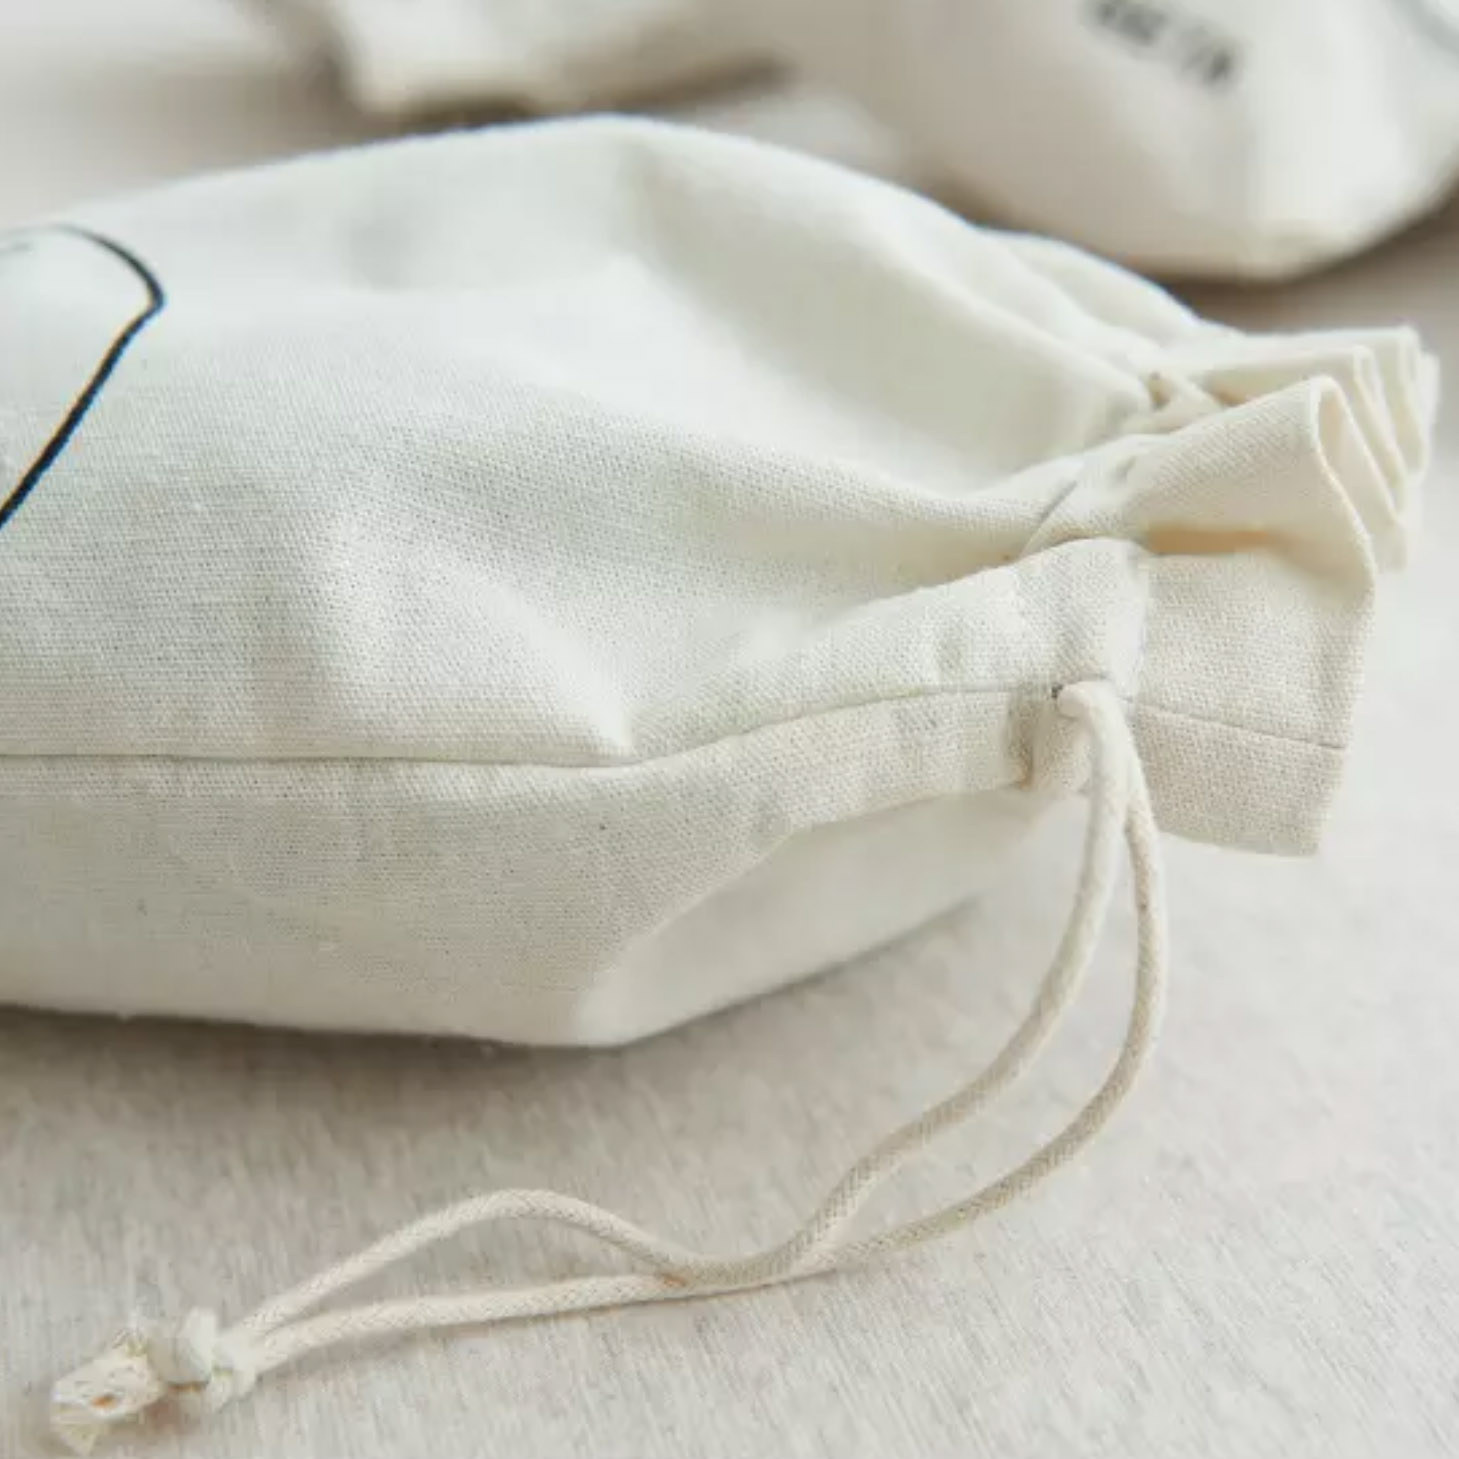 Close up picture of cotton drawstring bag